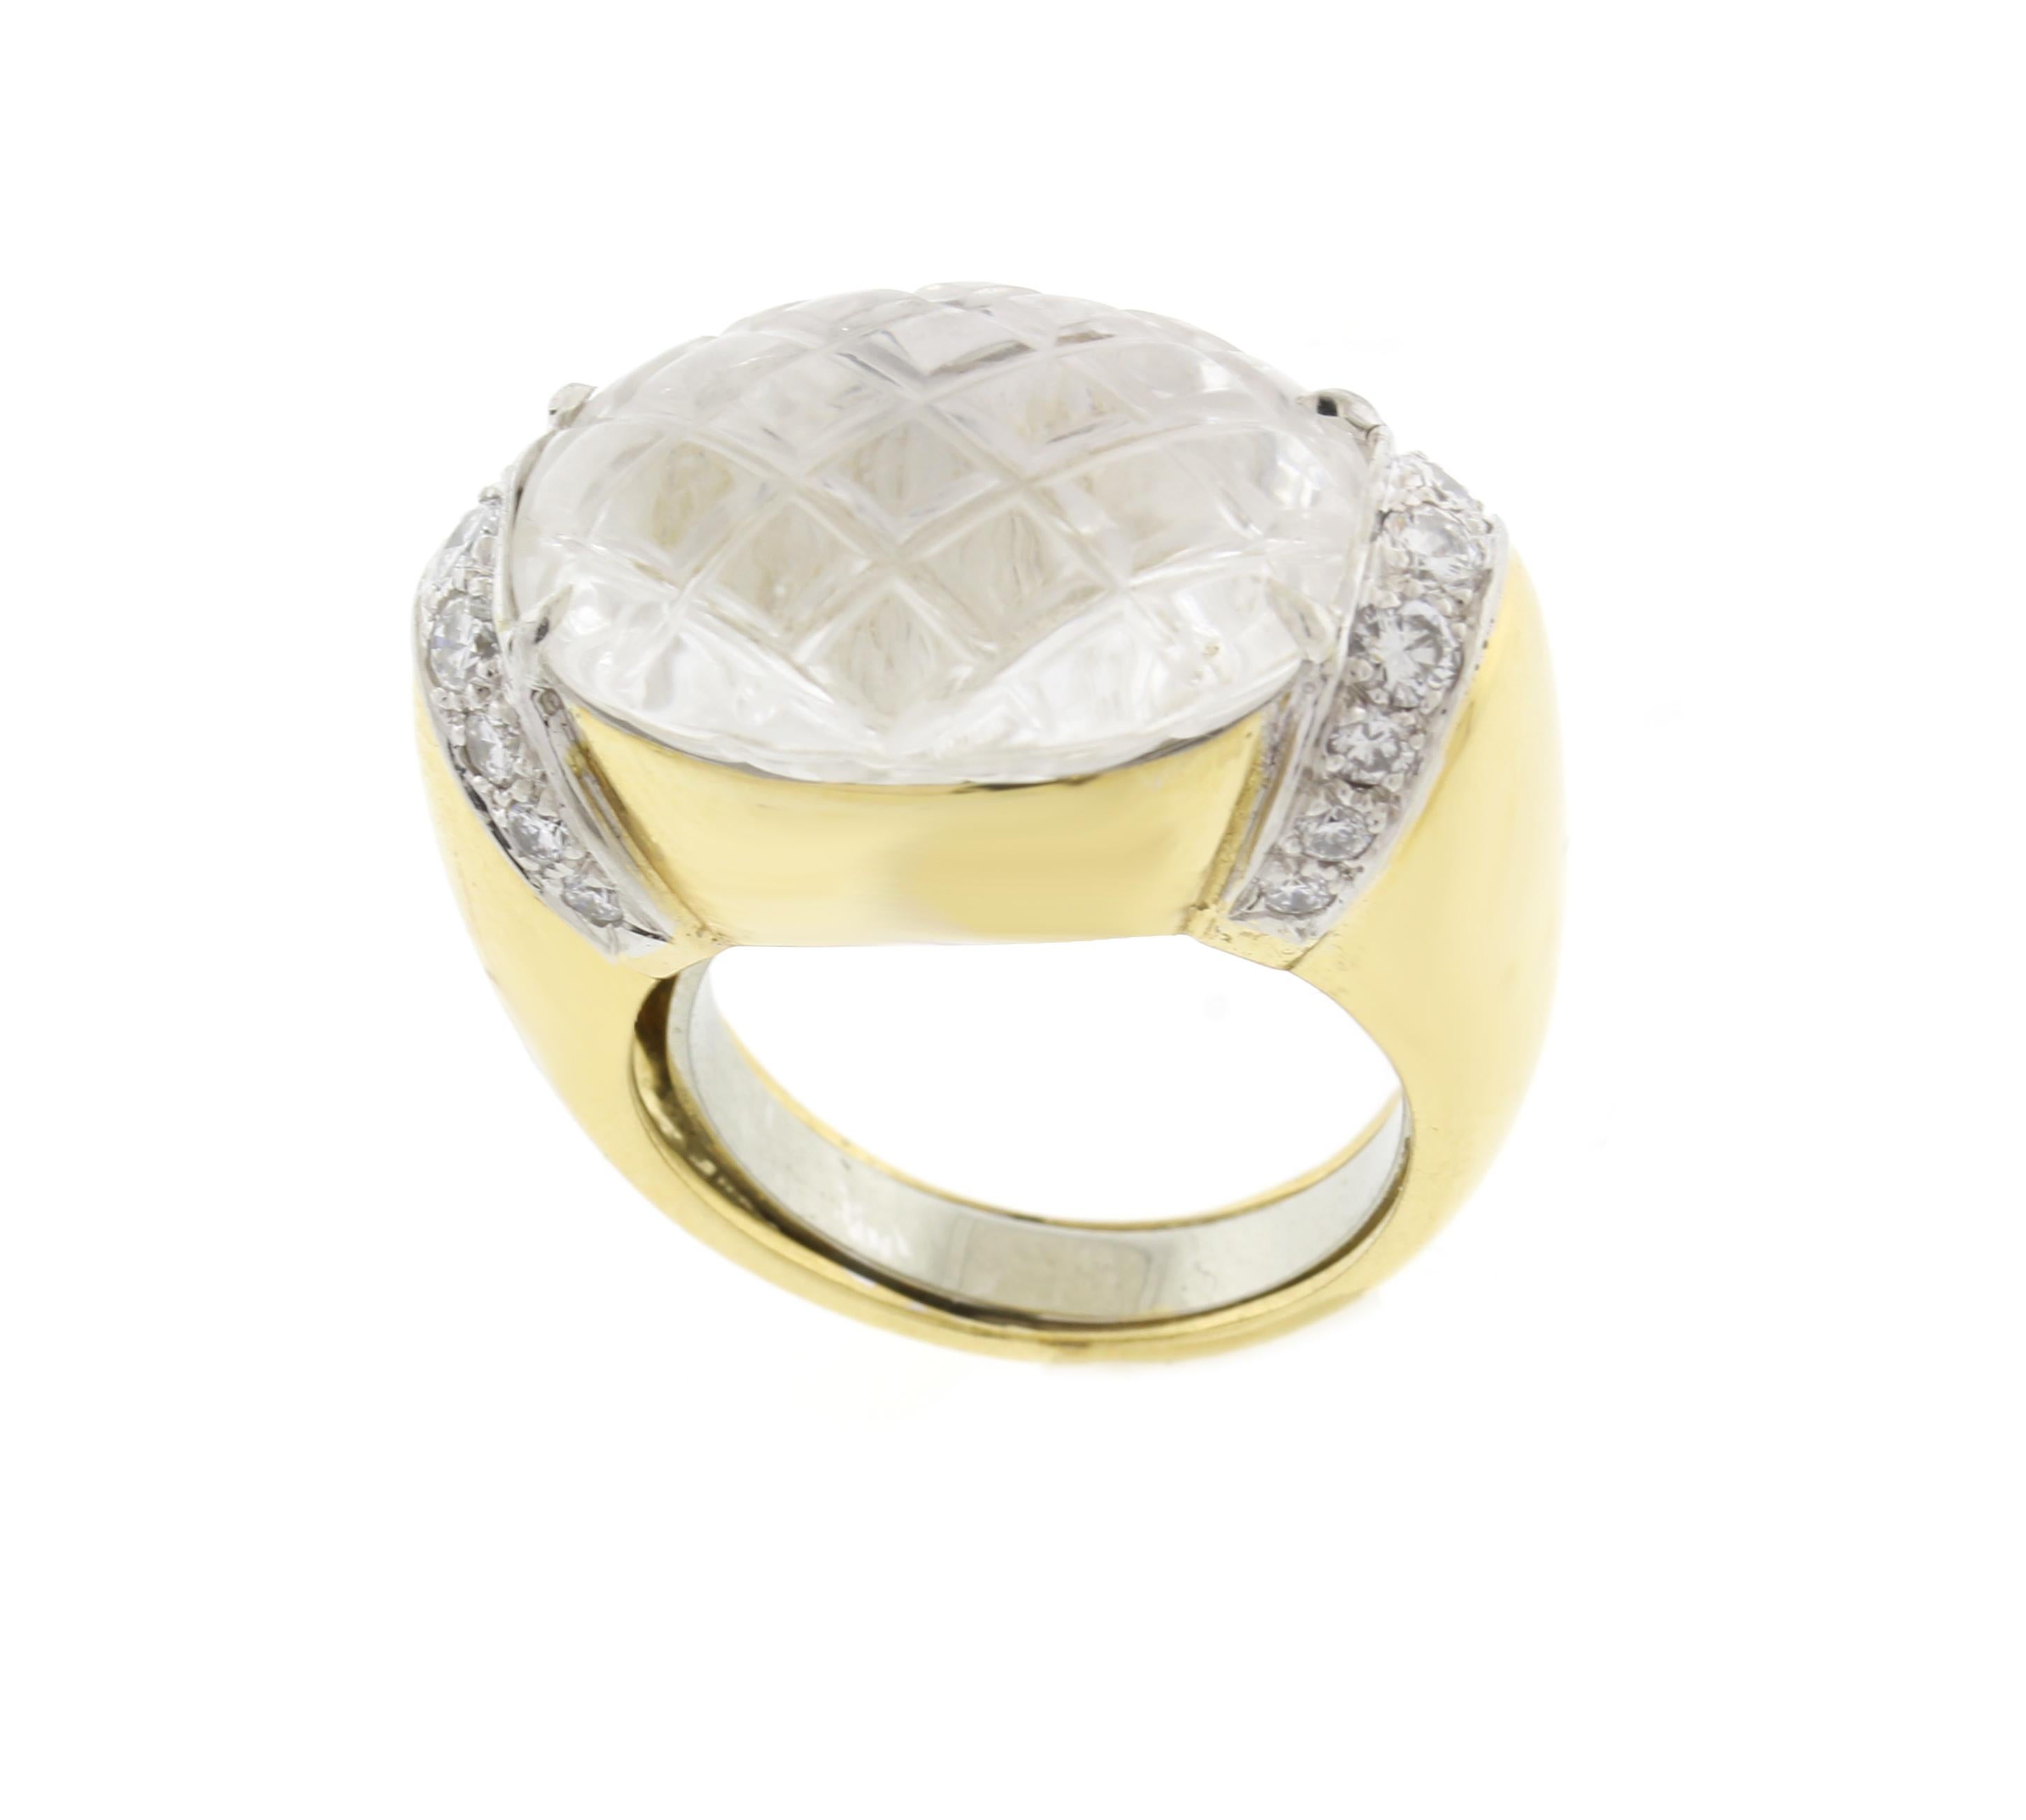 From David Webb a carved Crystal and diamond ring
♦ Designer: Davis Webb
♦ Metal: 18 karat and platinum
♦ Circa 1980s
♦ Rock Crystal 14 X 19mm
♦ 518Dia=.63 carats
♦ Packaging: Pampillonia presentation box
♦ Condition: Very Good , pre-owned
♦ Price: